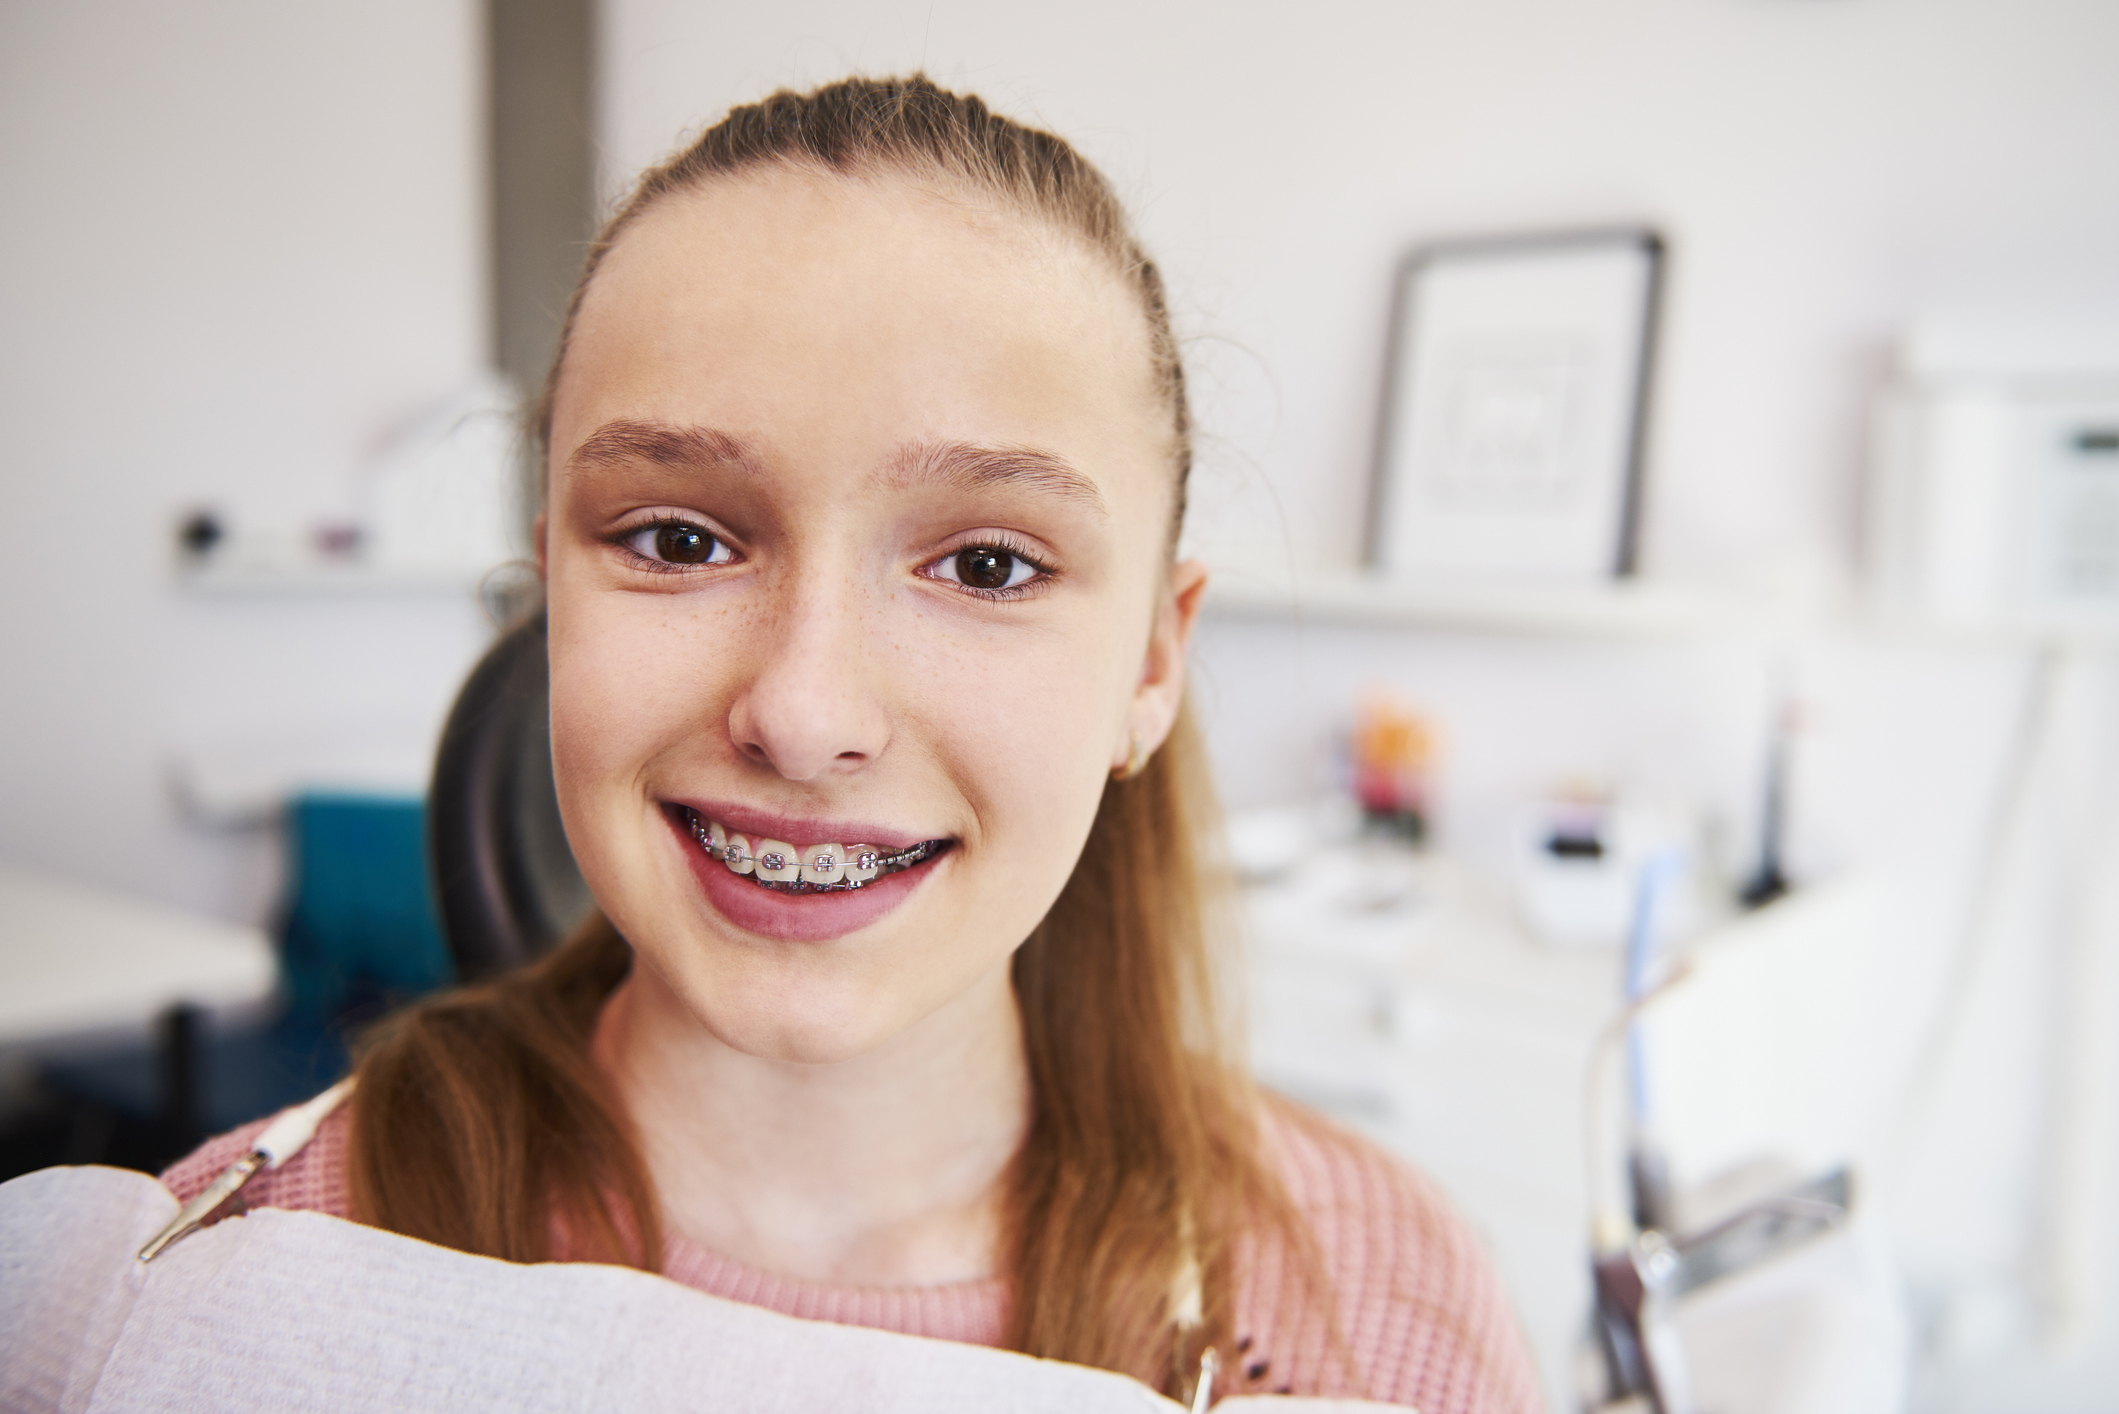 How can I get braces for my child on NHS